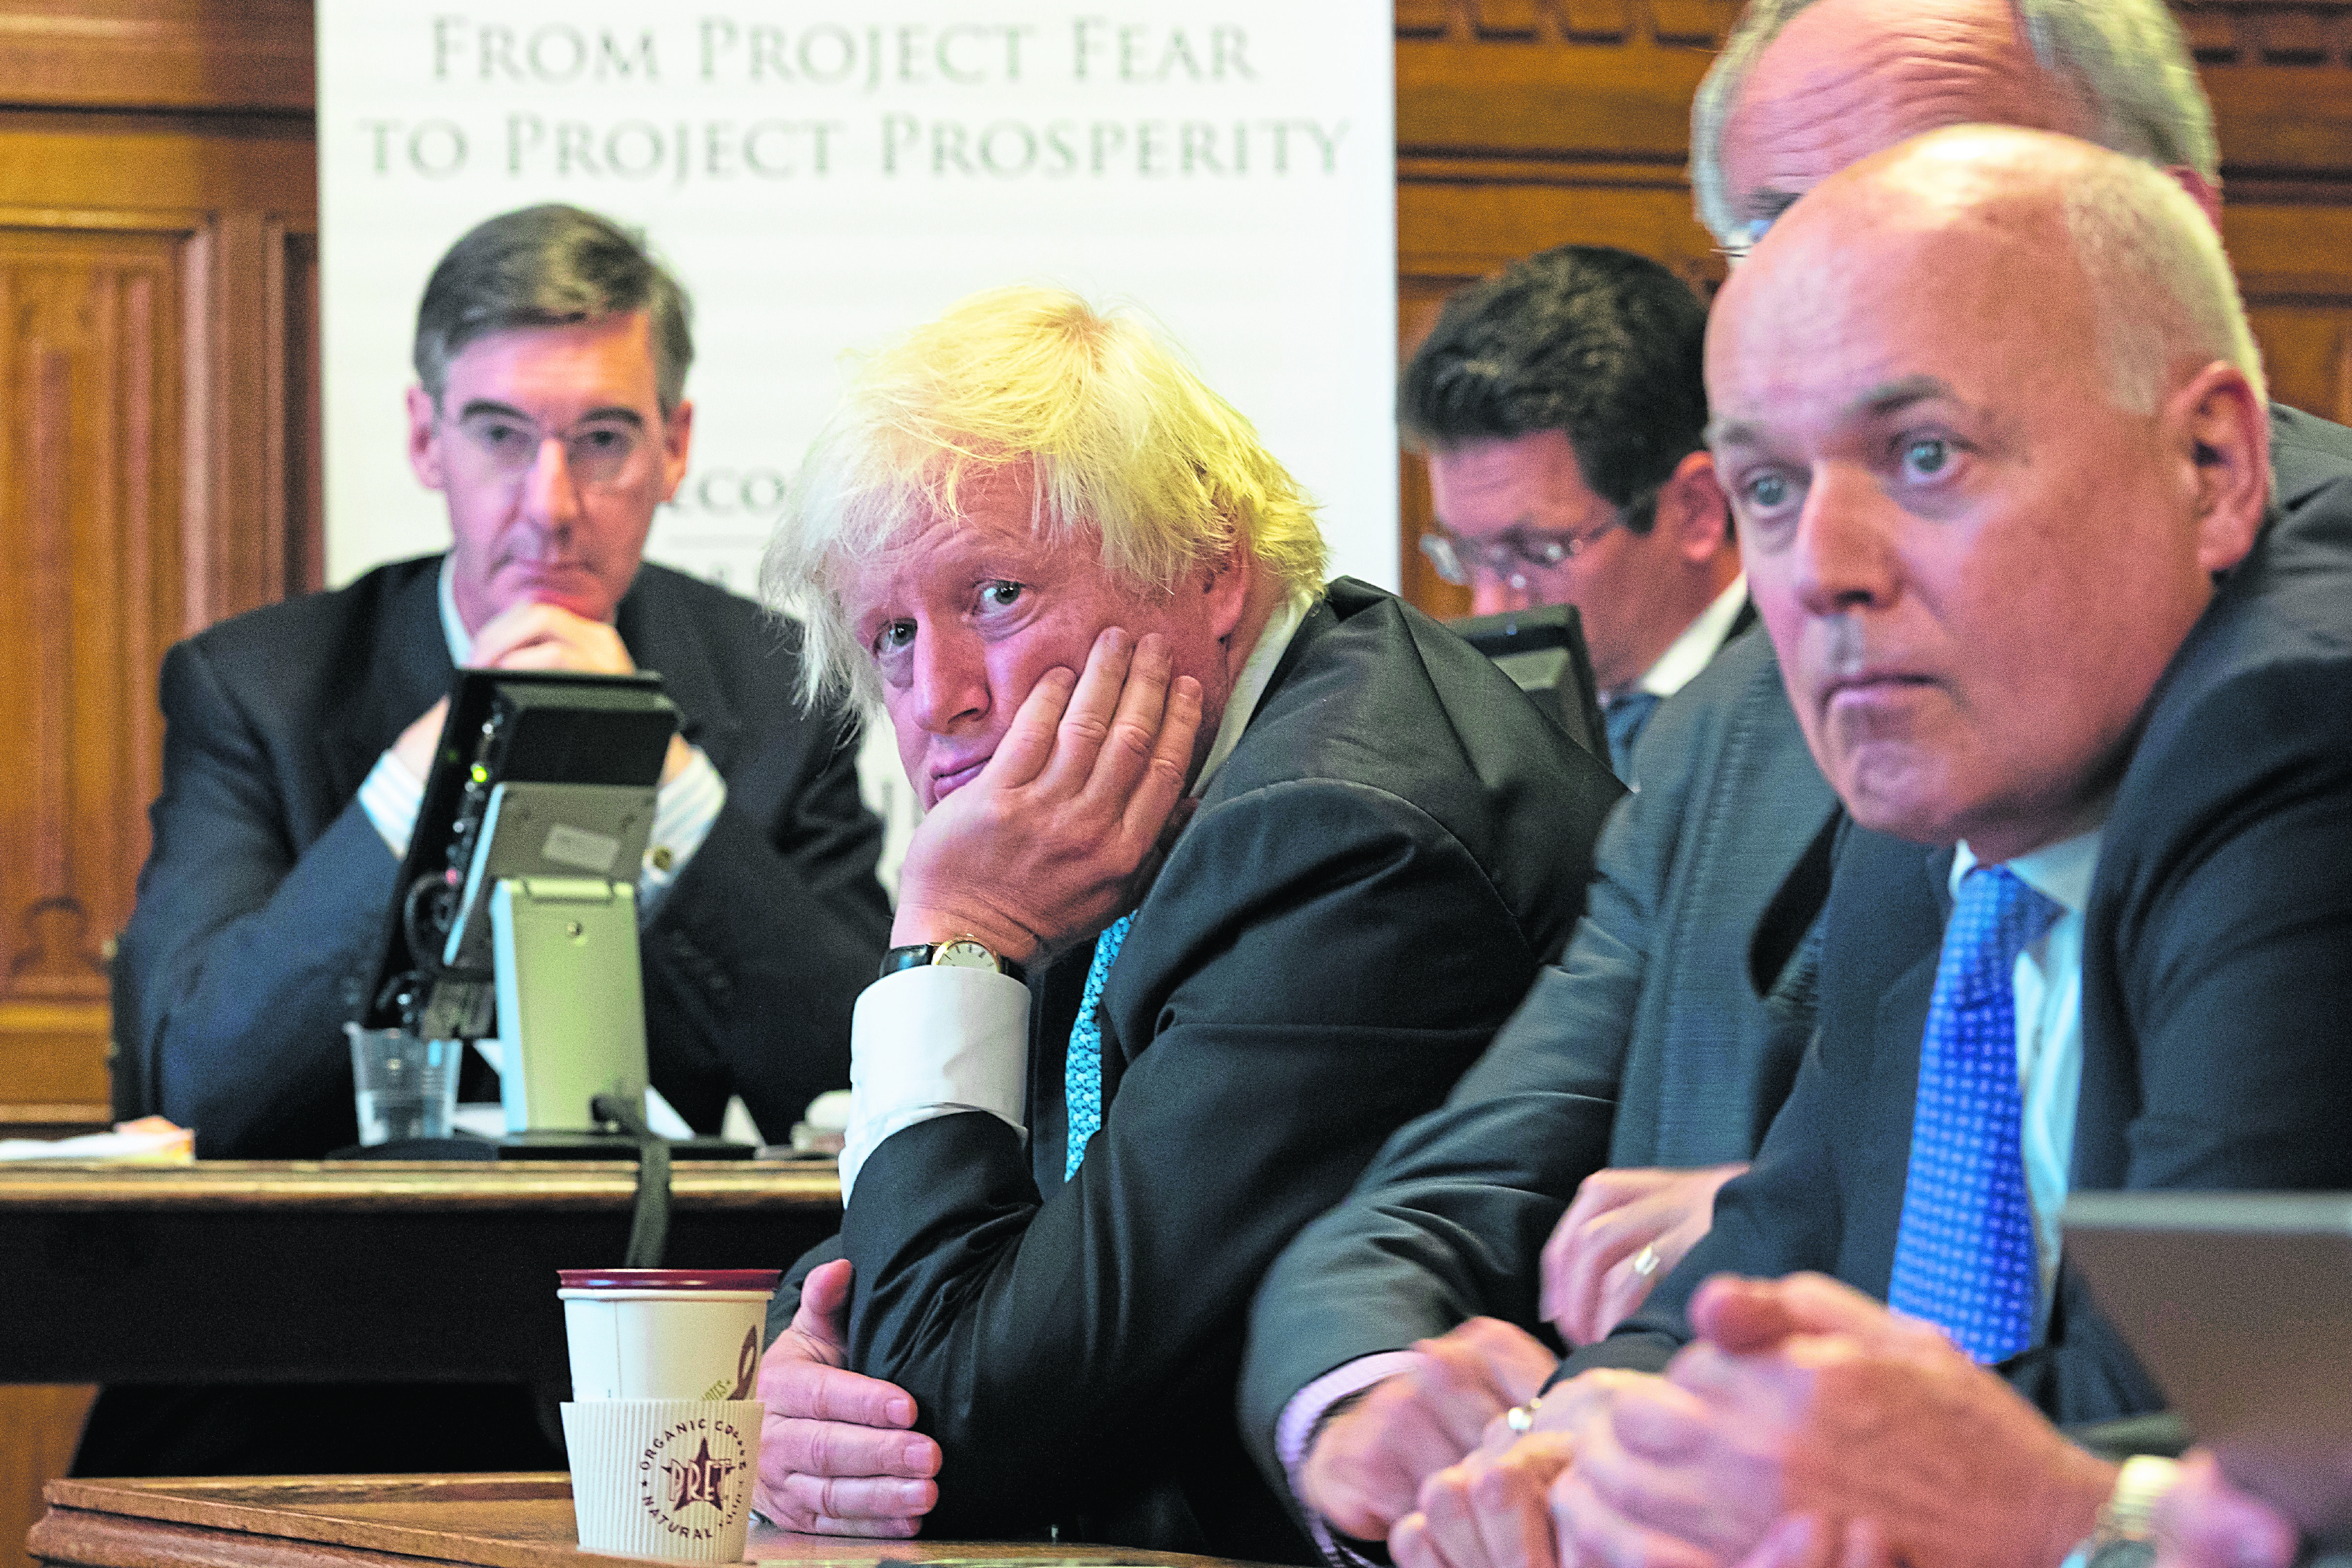 Iain Duncan Smith (right) with Jacob Rees Mogg (left) and Prime Minister Boris Johnson